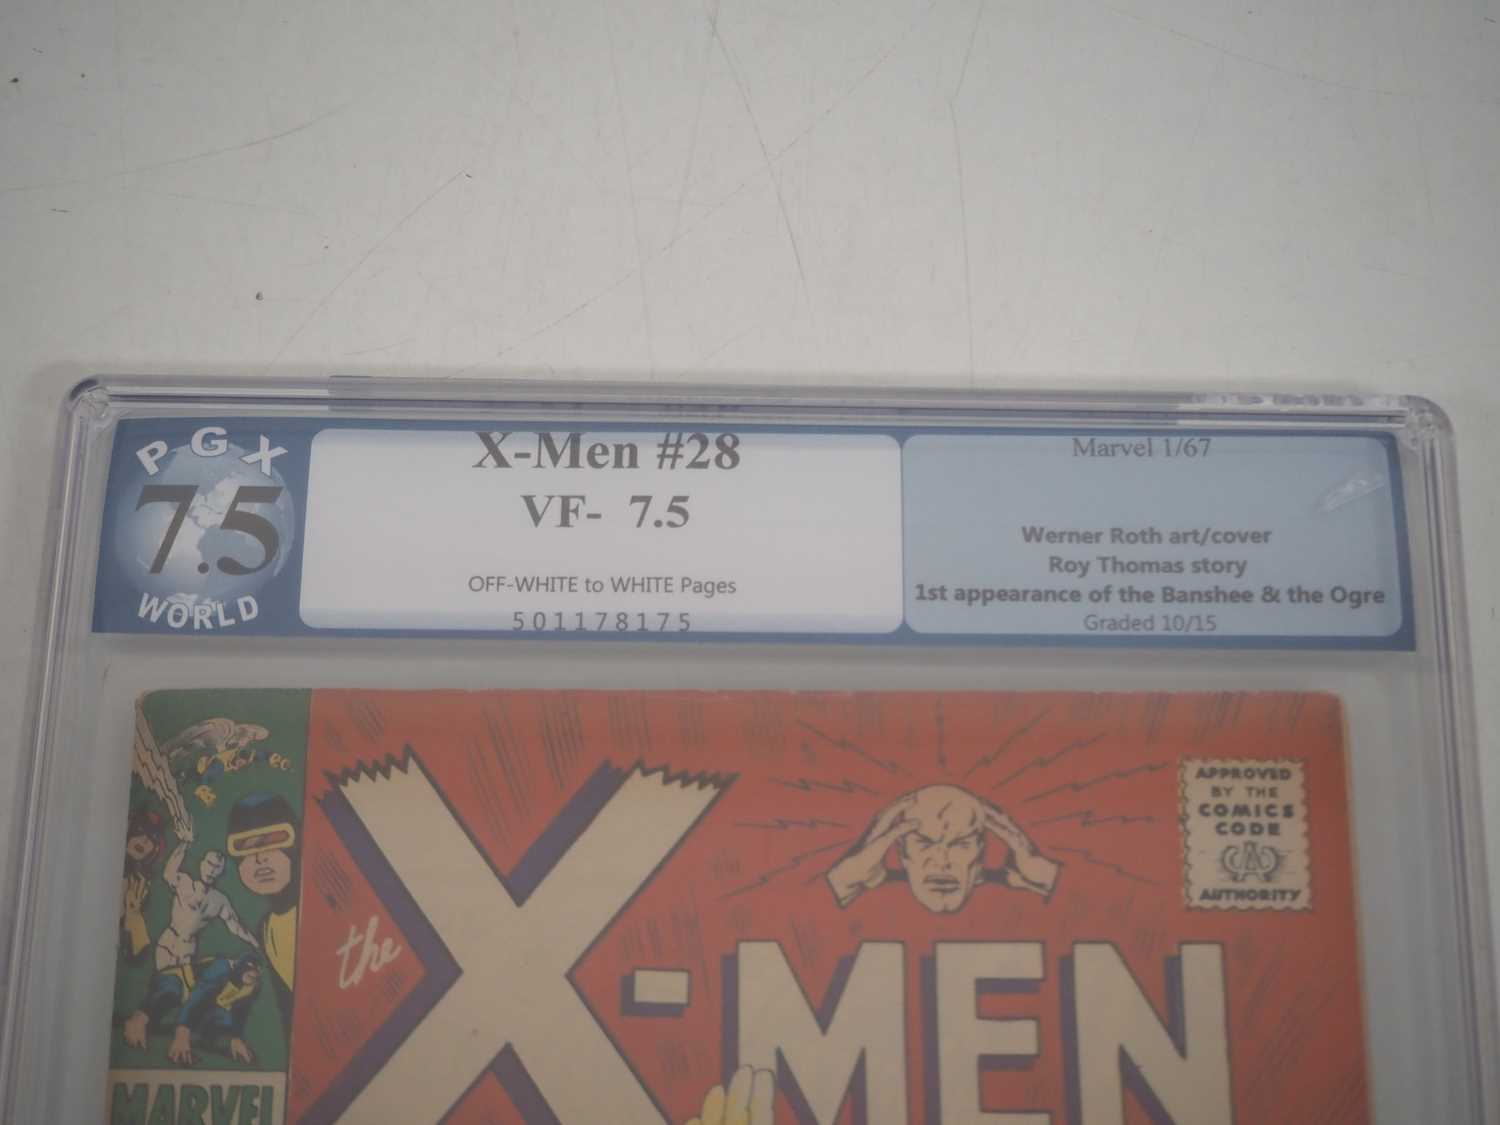 X-MEN #28 (1967 - MARVEL) GRADED 7.5 (VF-) by PGX - The first full appearance of Banshee, father - Image 3 of 4